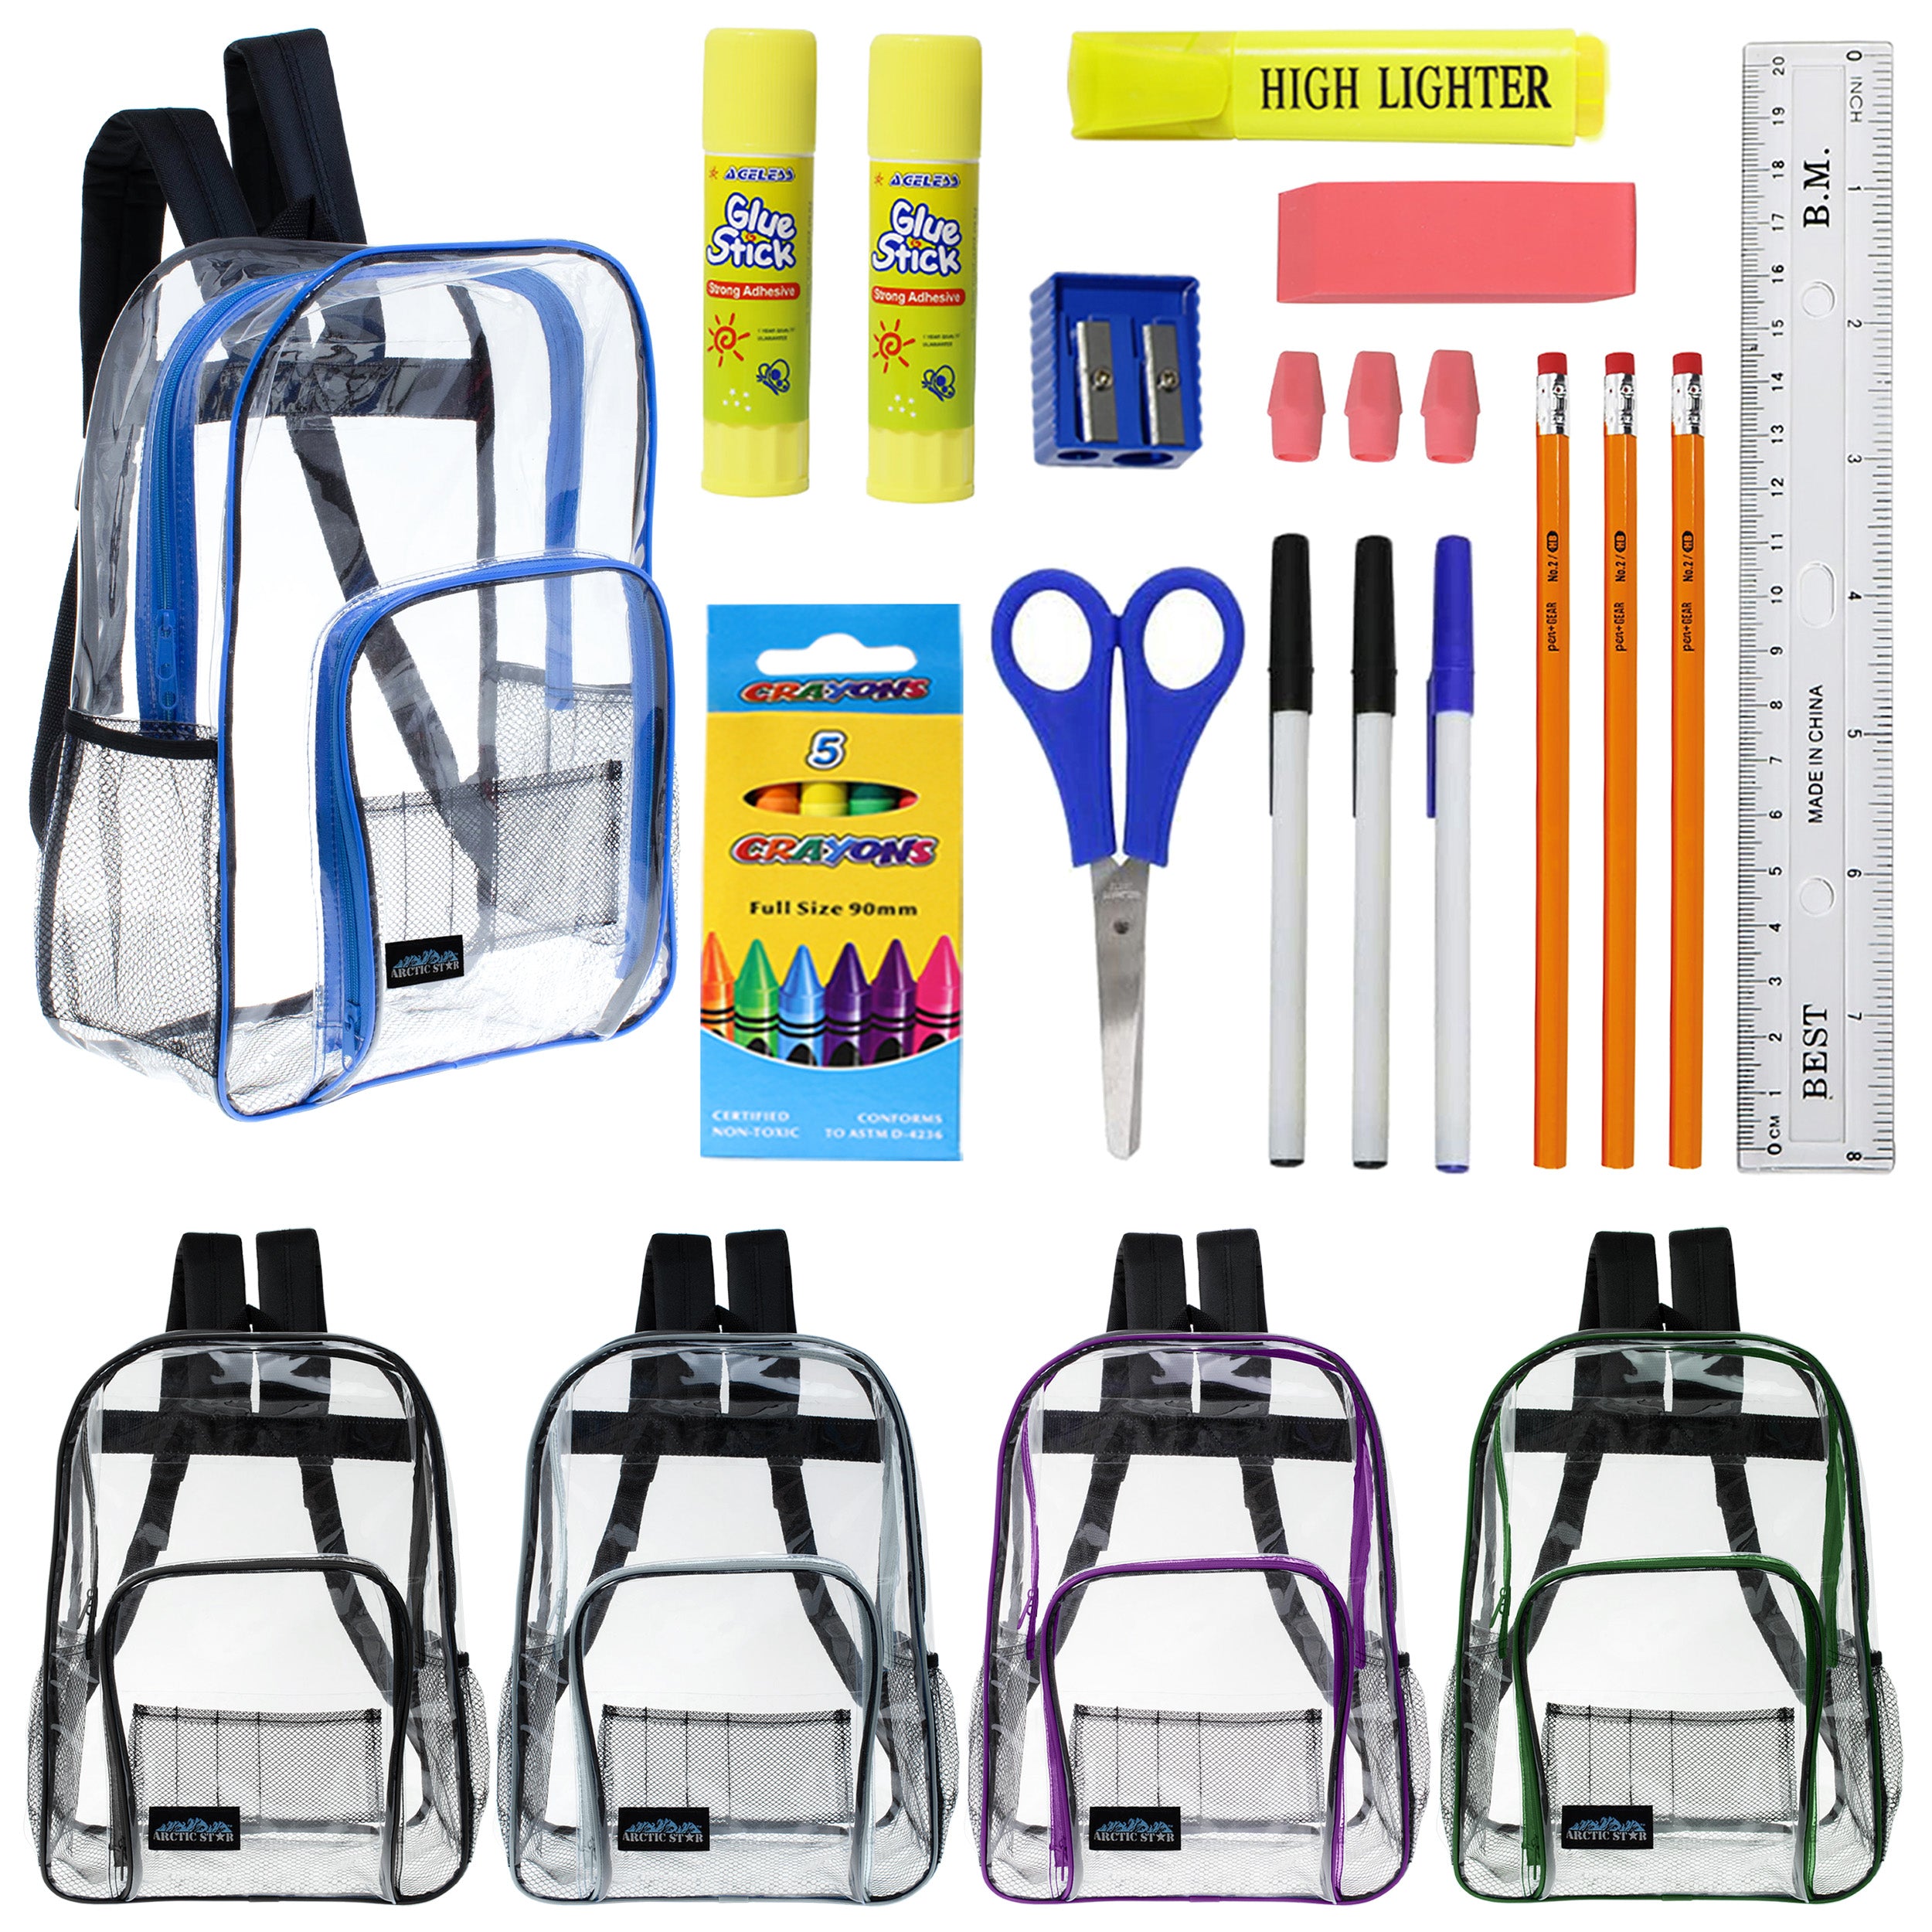 17 Inch Wholesale Backpacks in Assorted Colors with School Supply Kits Bulk - Kit of 12